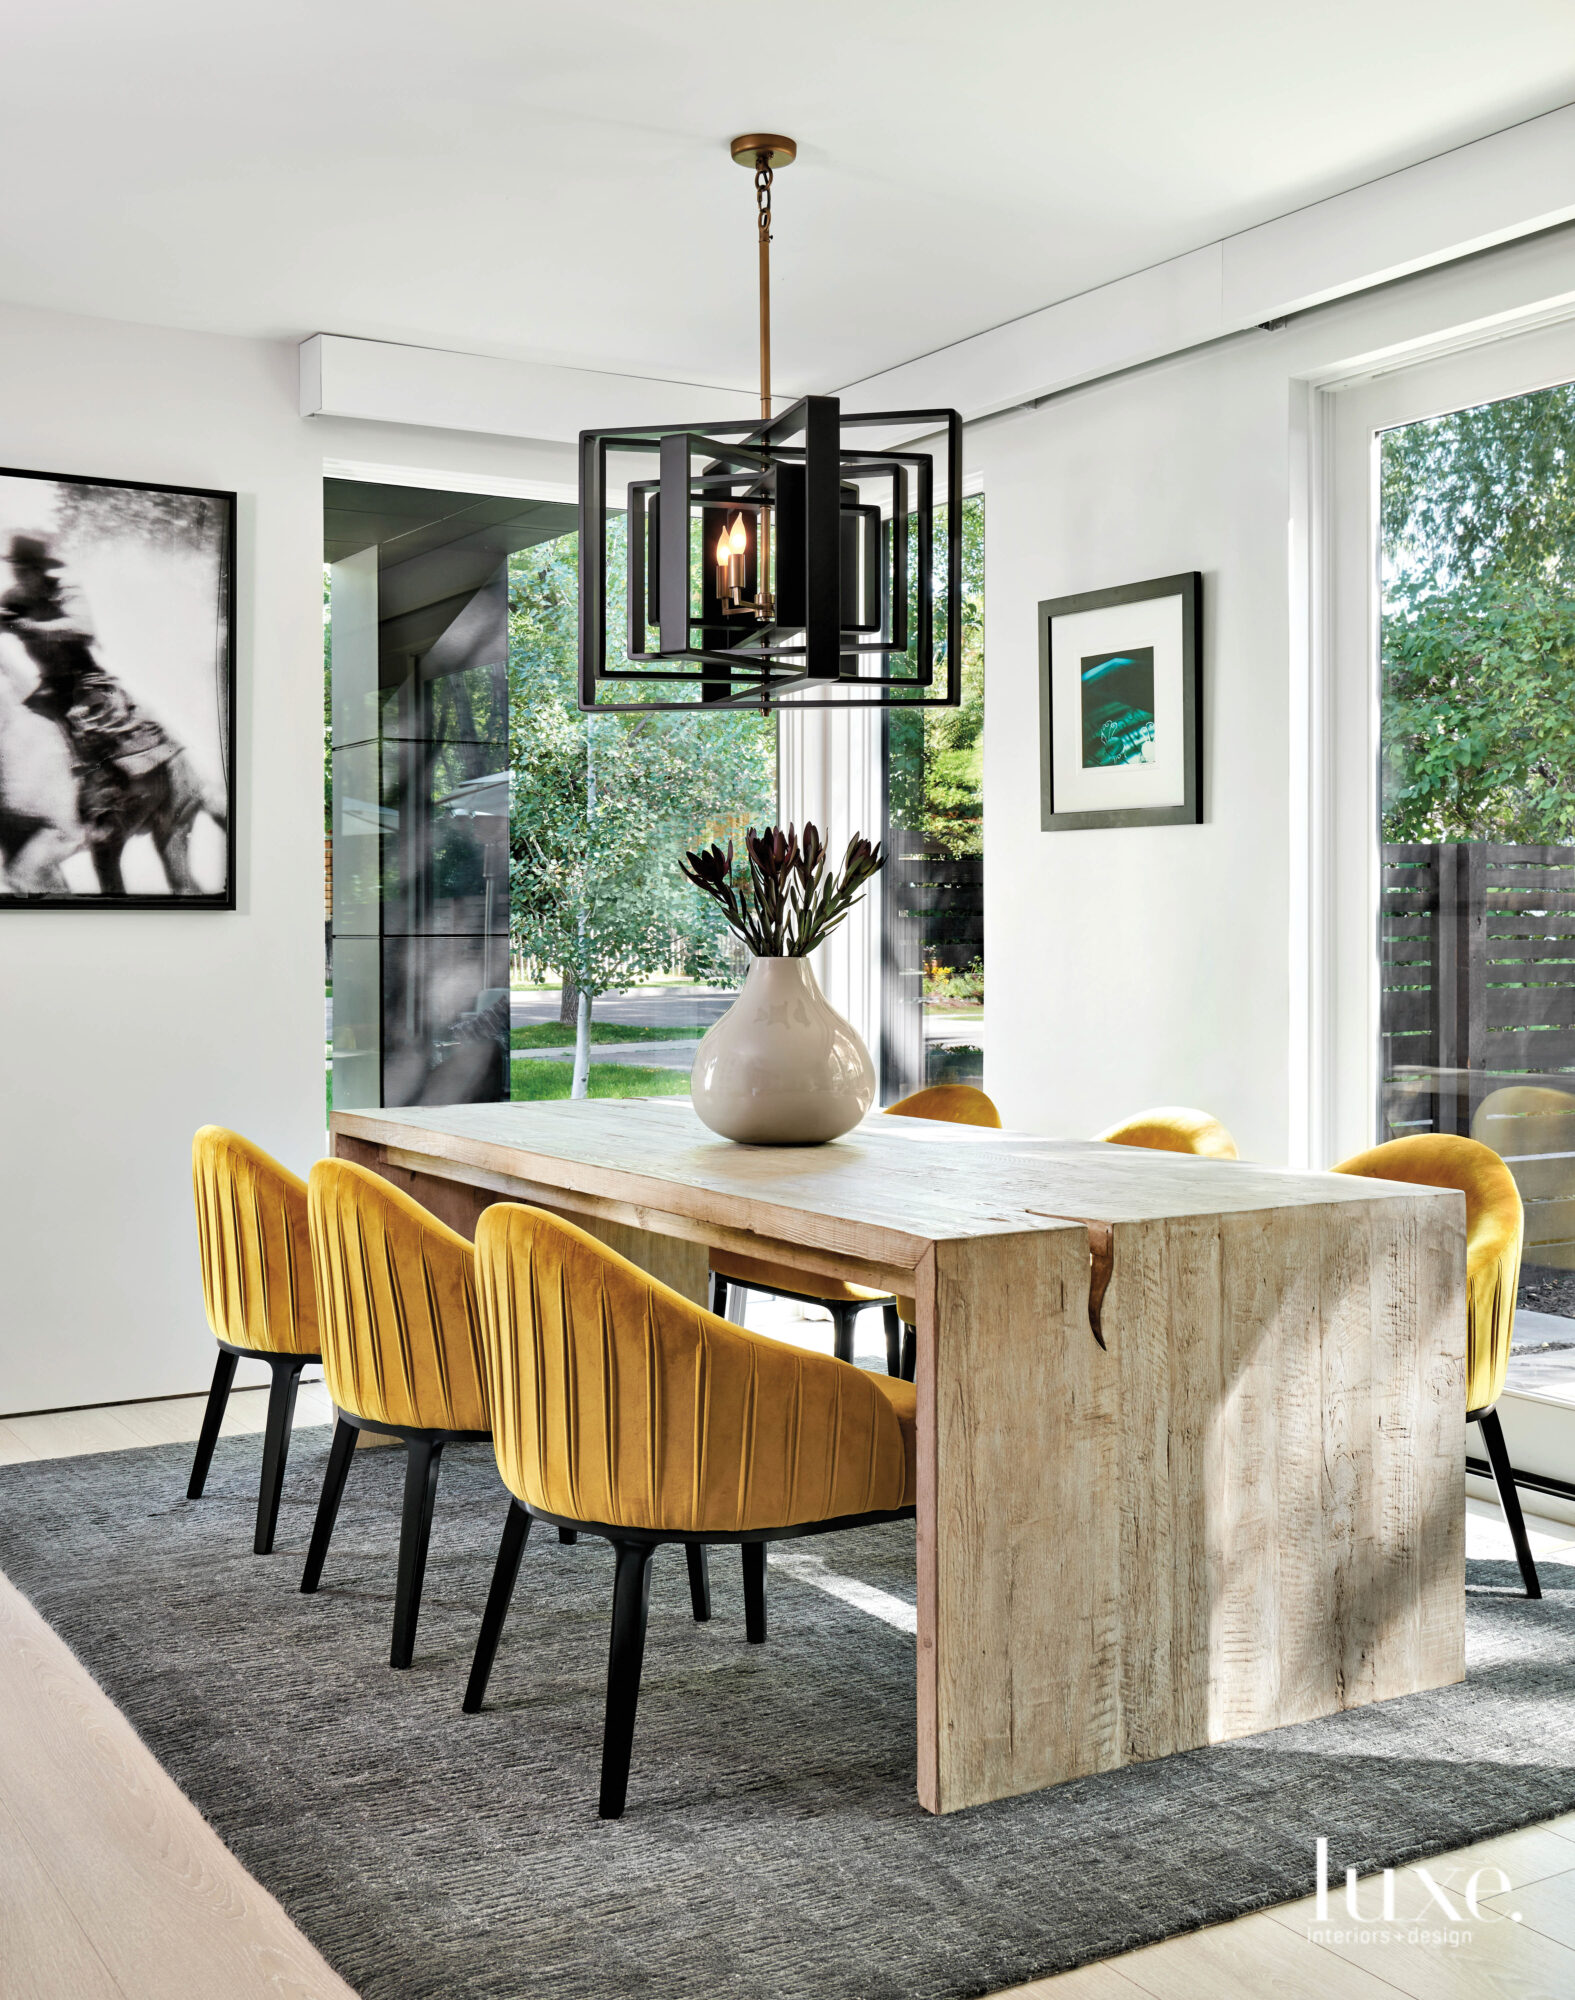 A dining room features mustard-colored chairs and a modern light fixture.